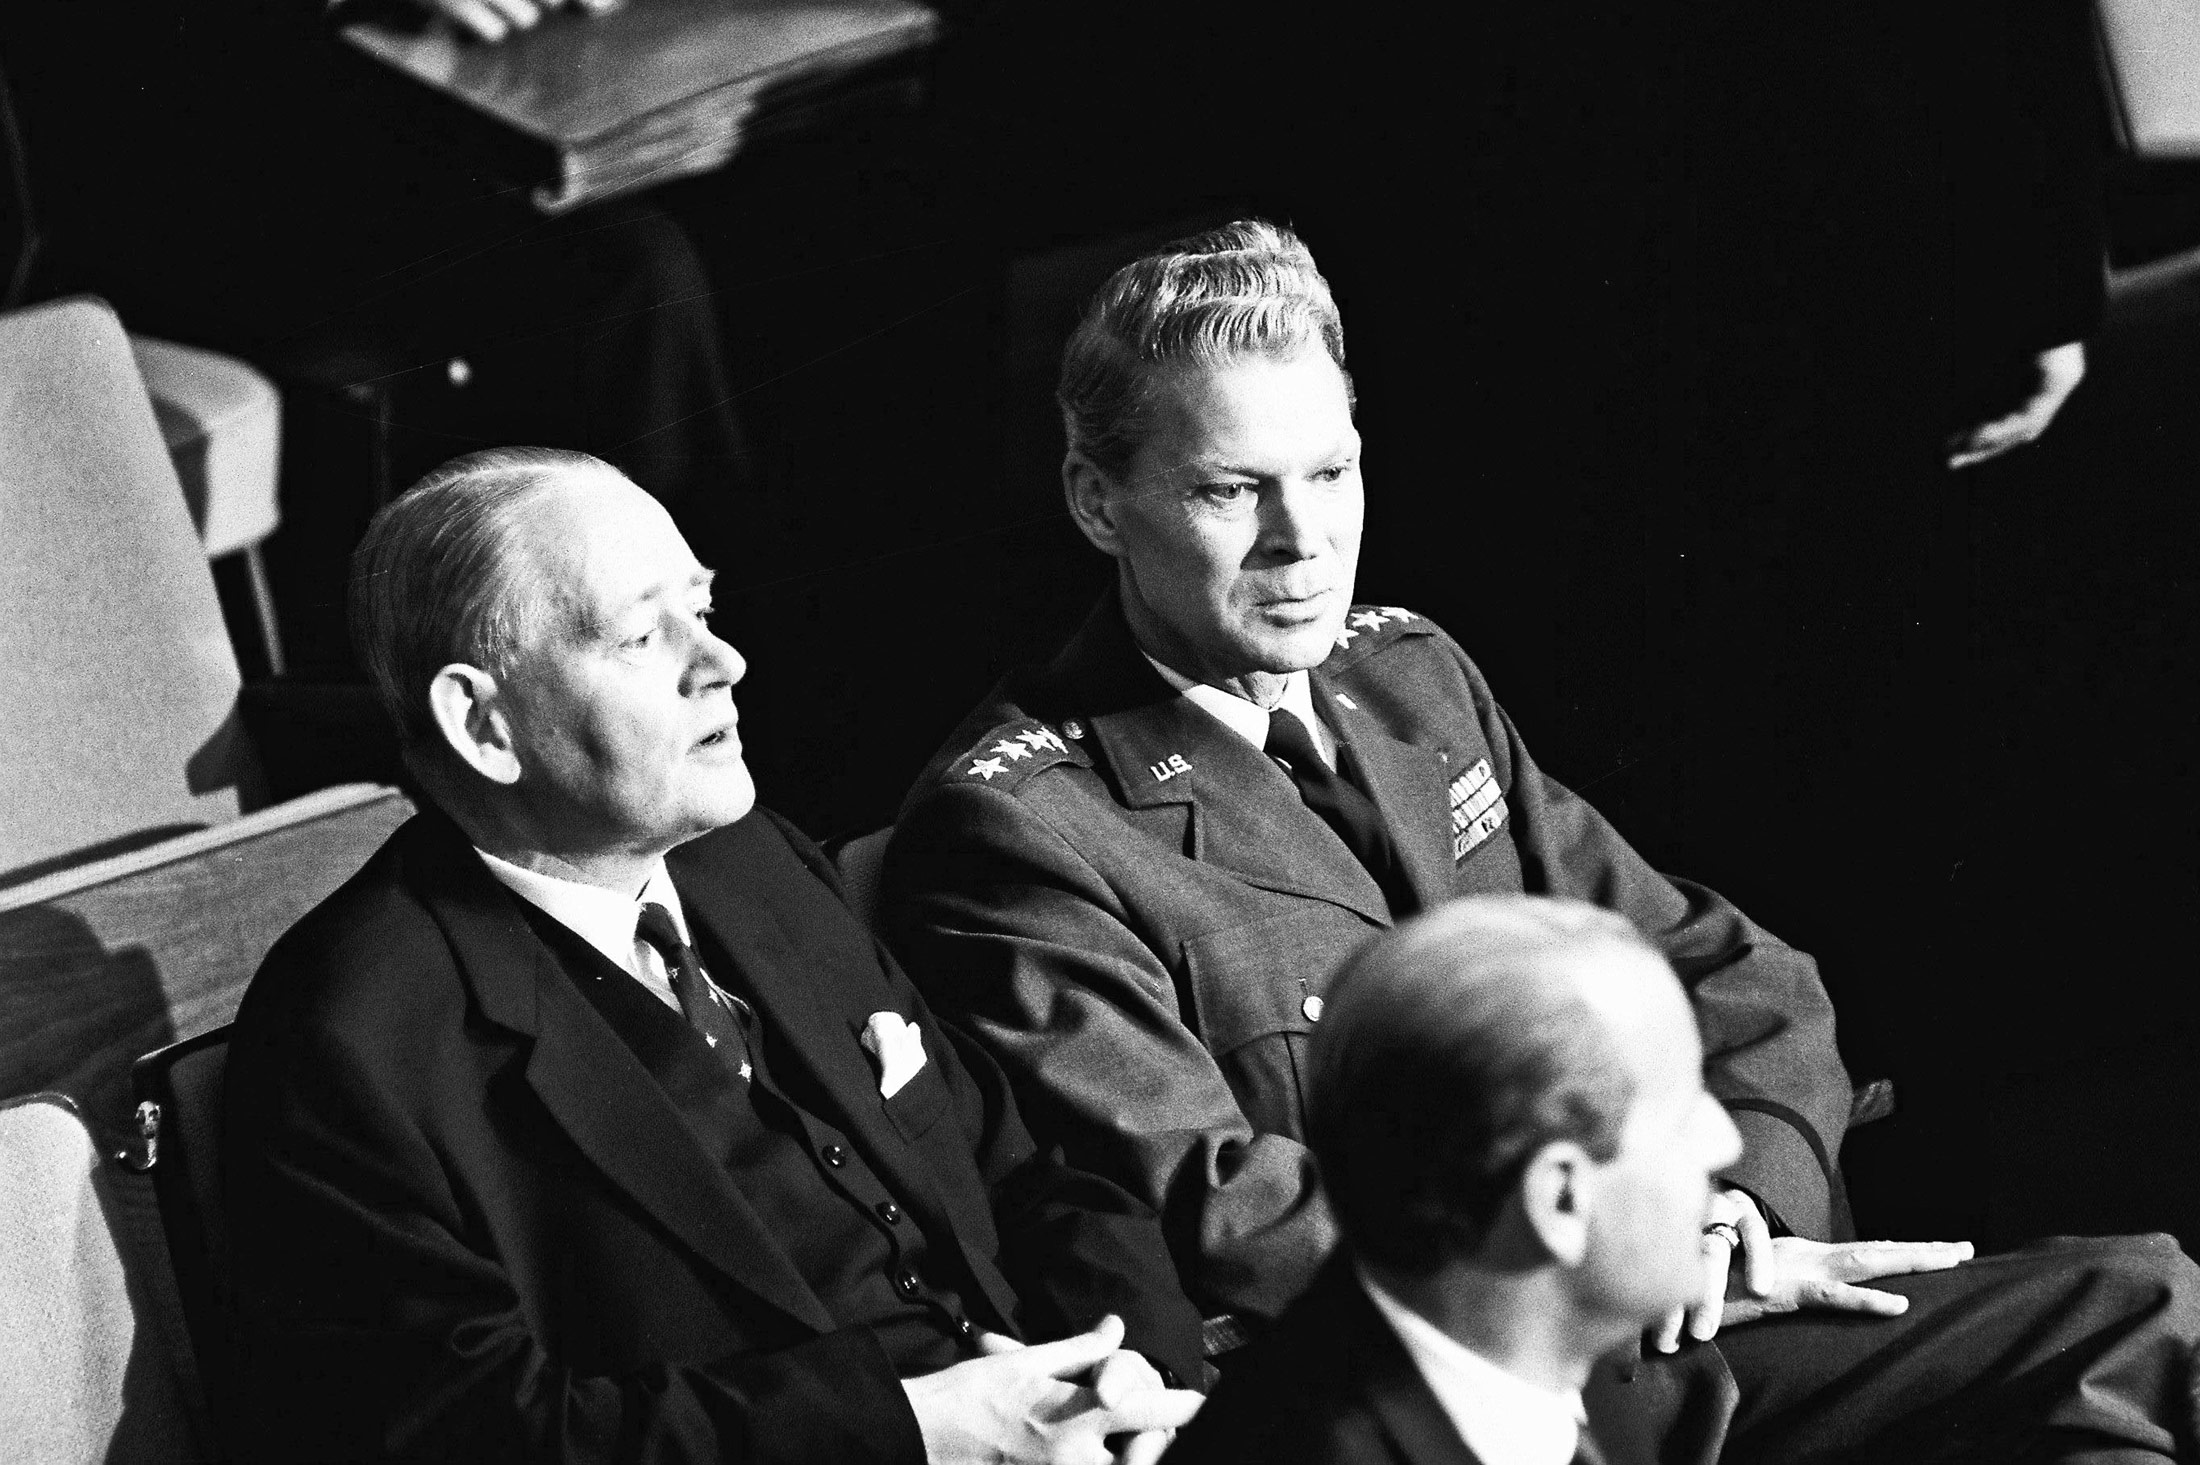 Stikker with SACEUR Norstad (right)